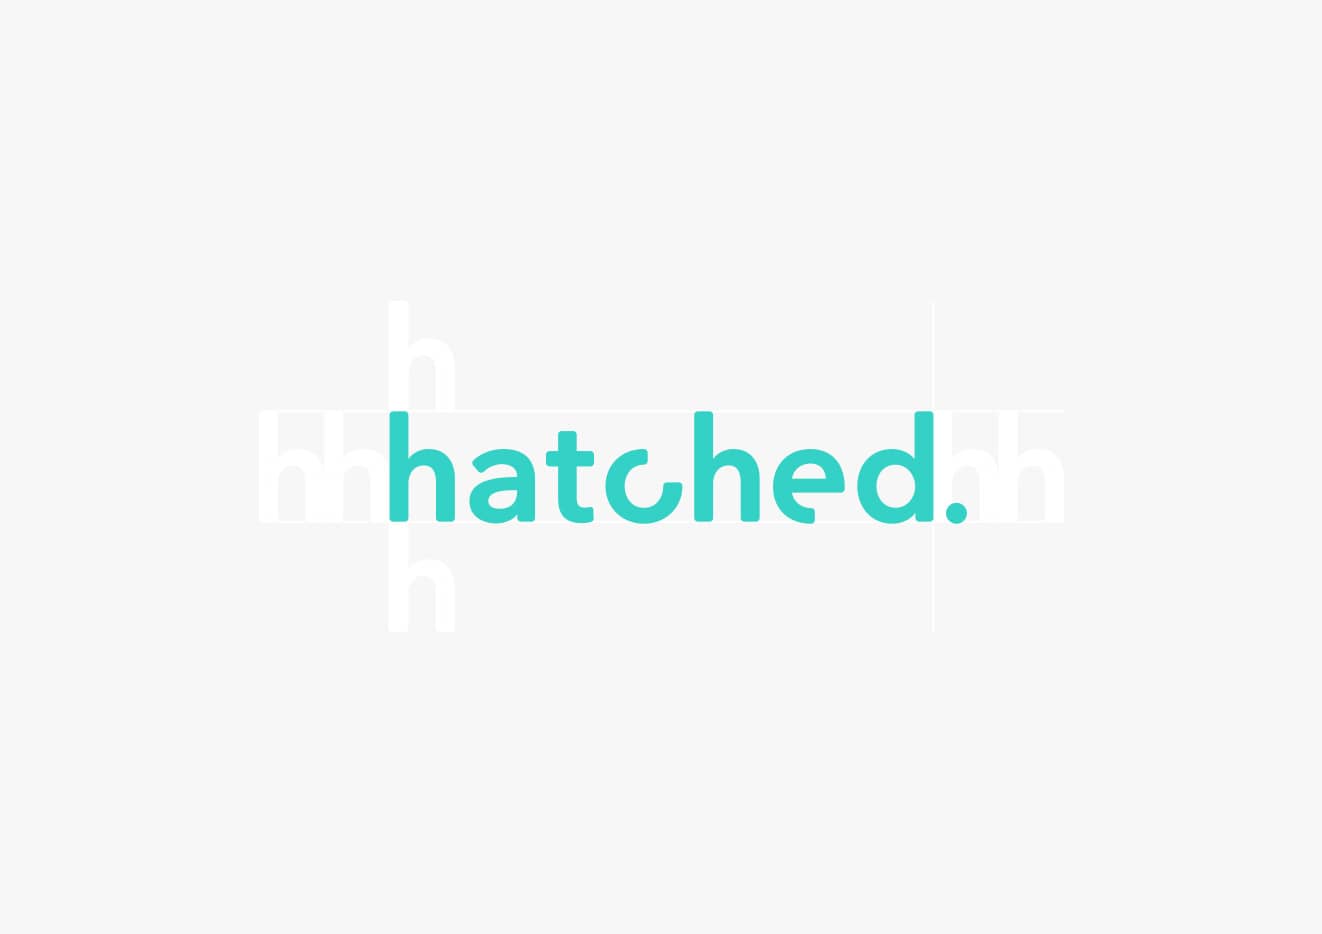 Hatched rebrand clearance